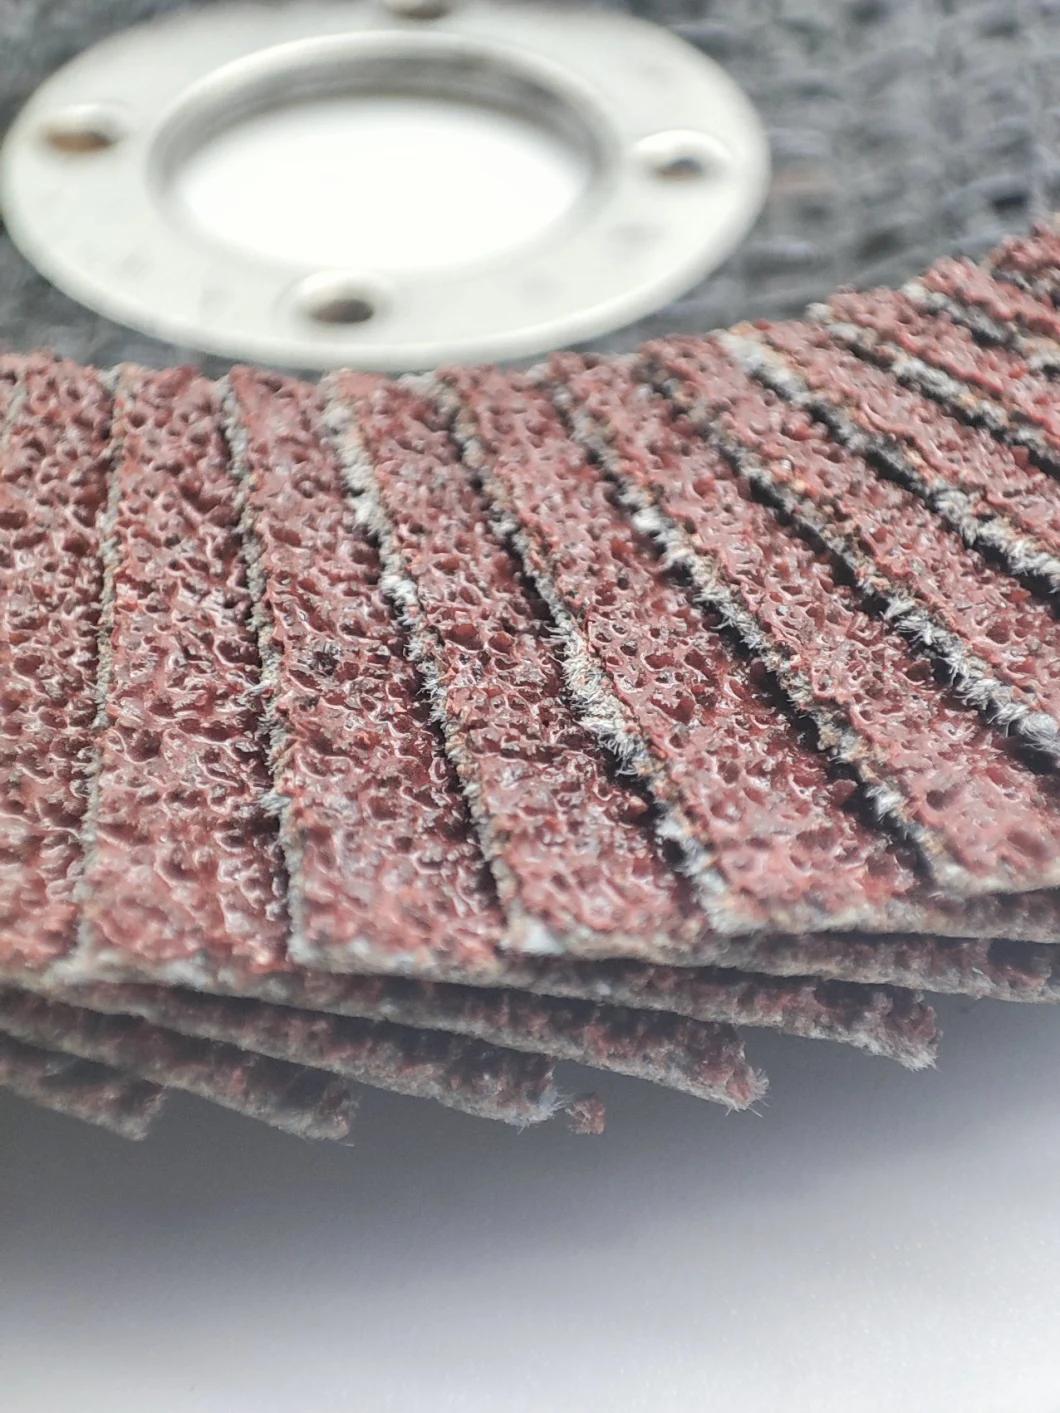 Flexible Wear-Resisting Tooling Aluminum Oxide Abrasive Sanding Flap Disc with High Quality for Honing Polishing Metal Wood Stainless Steel